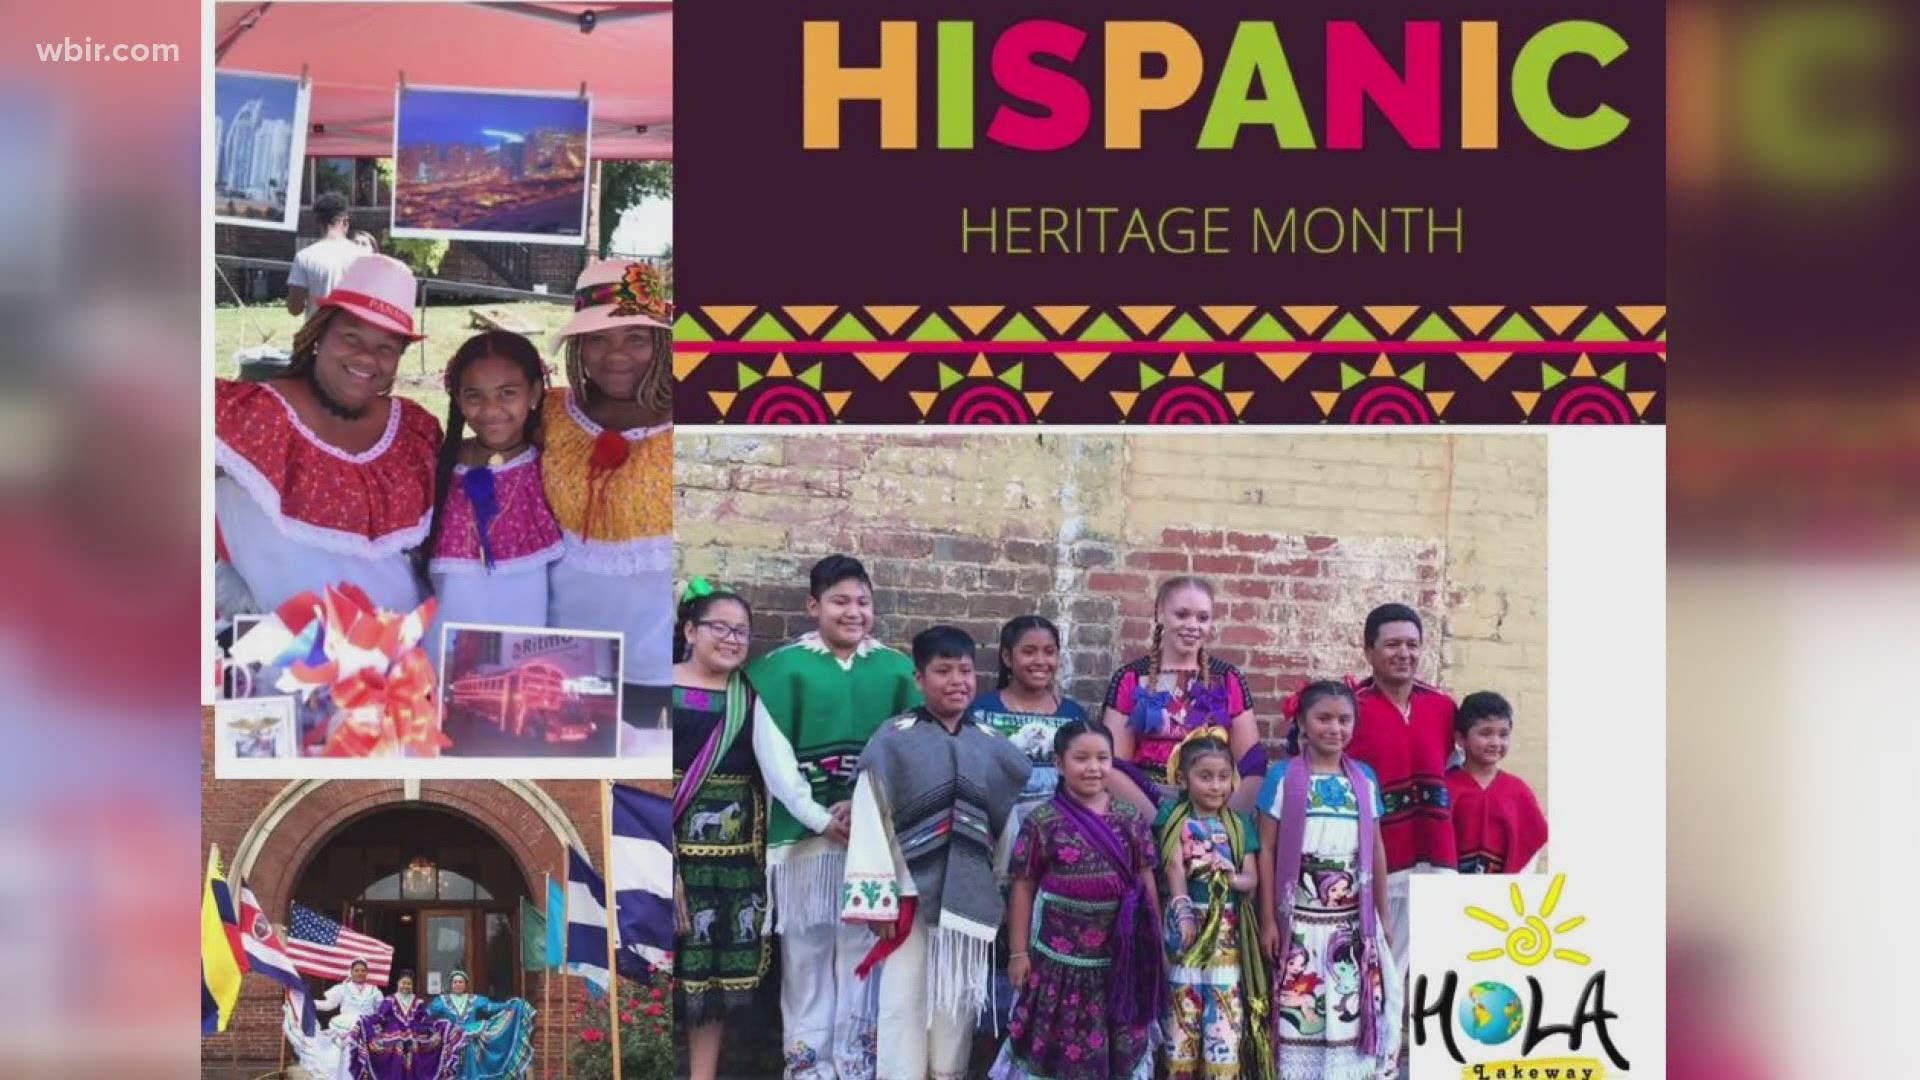 Virtual guests speakers are able to share their stories, dances and even recipes from their culture during Hispanic Heritage Month celebrations.